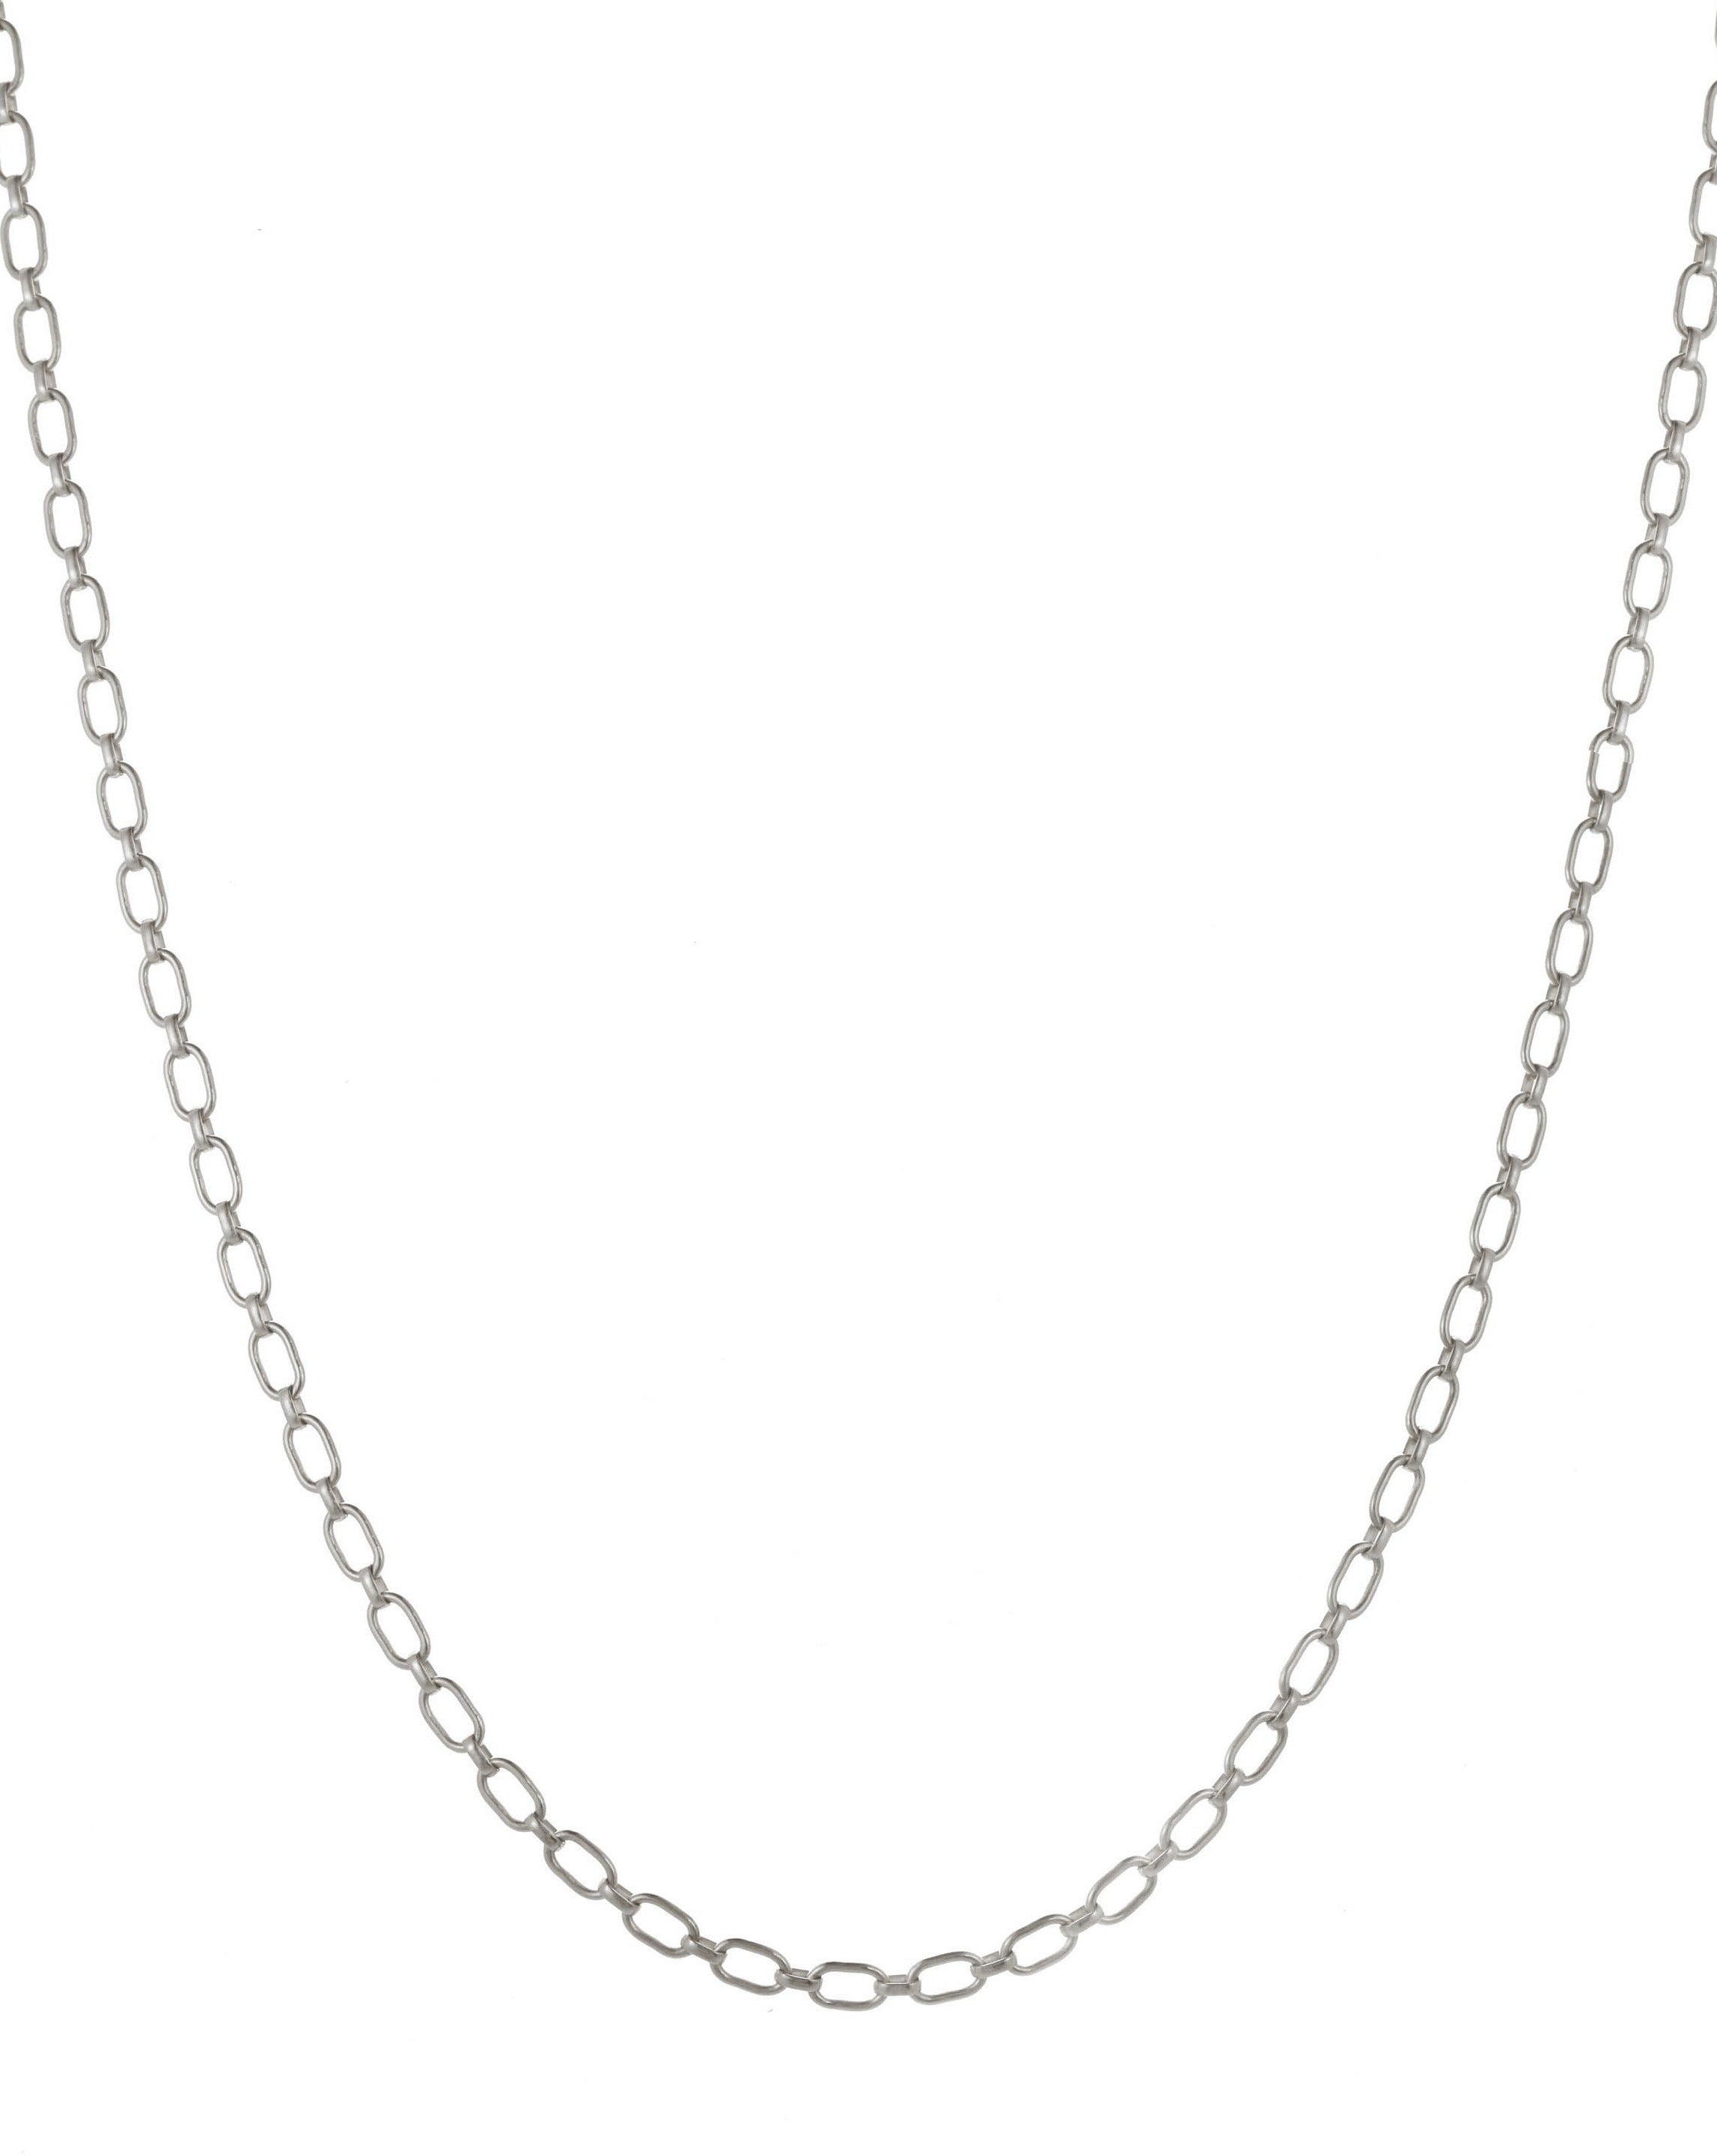 Calle Chain Necklace by KOZAKH. A 14 to 16 inch adjustable length chain necklace in Sterling Silver.